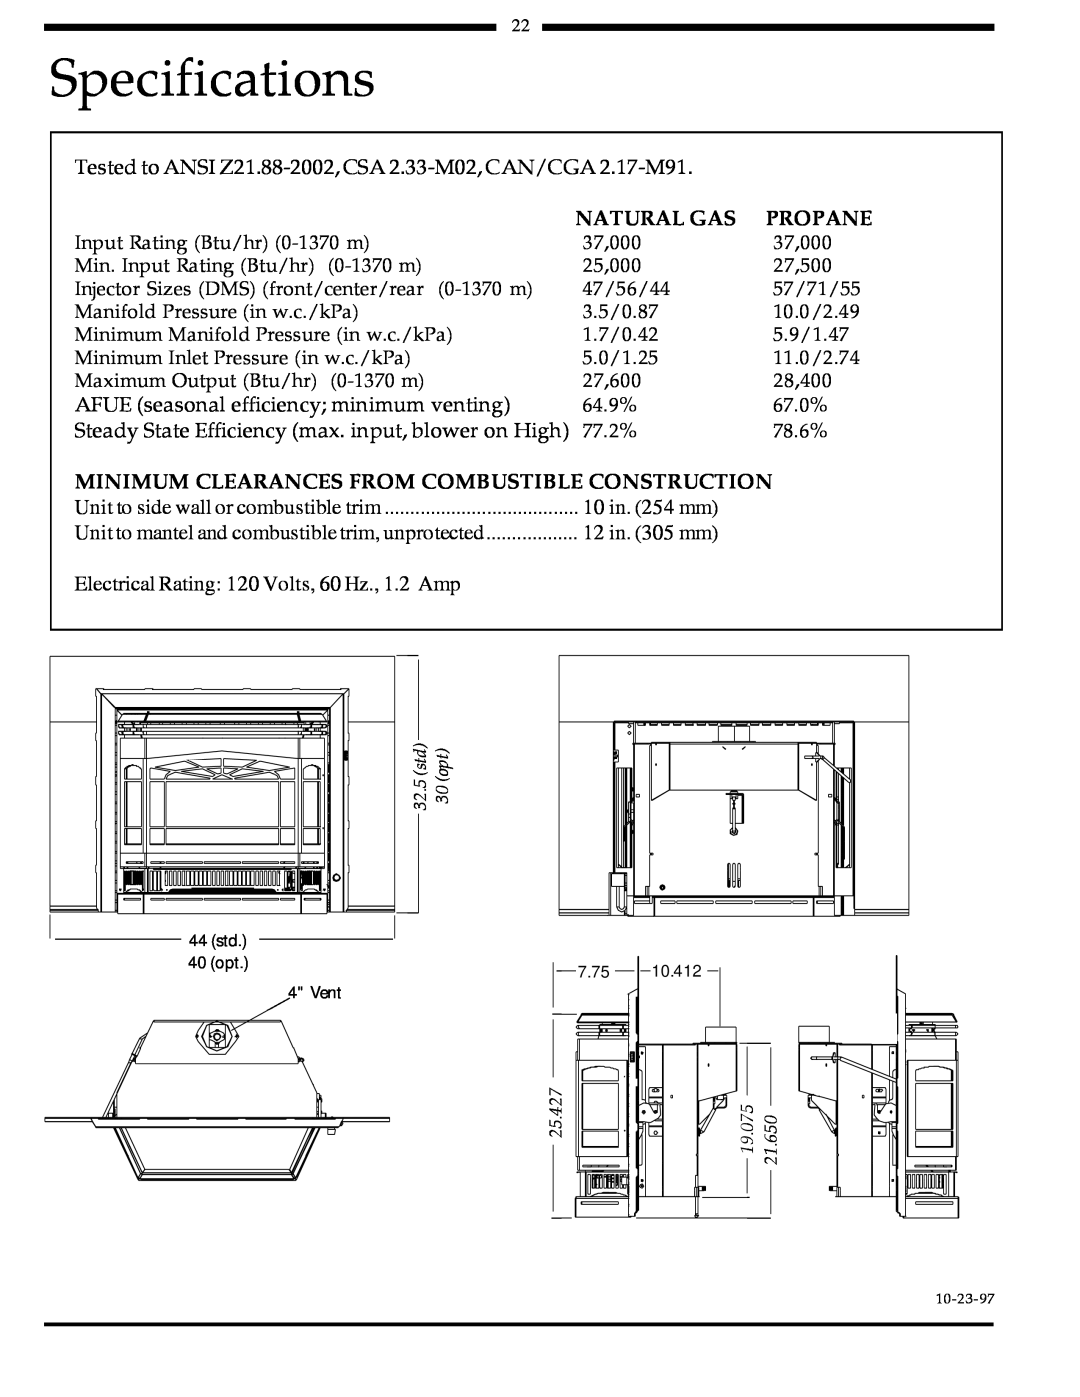 Harman Stove Company 828i manual Specifications, Natural Gas, Propane, Minimum Clearances From Combustible Construction 